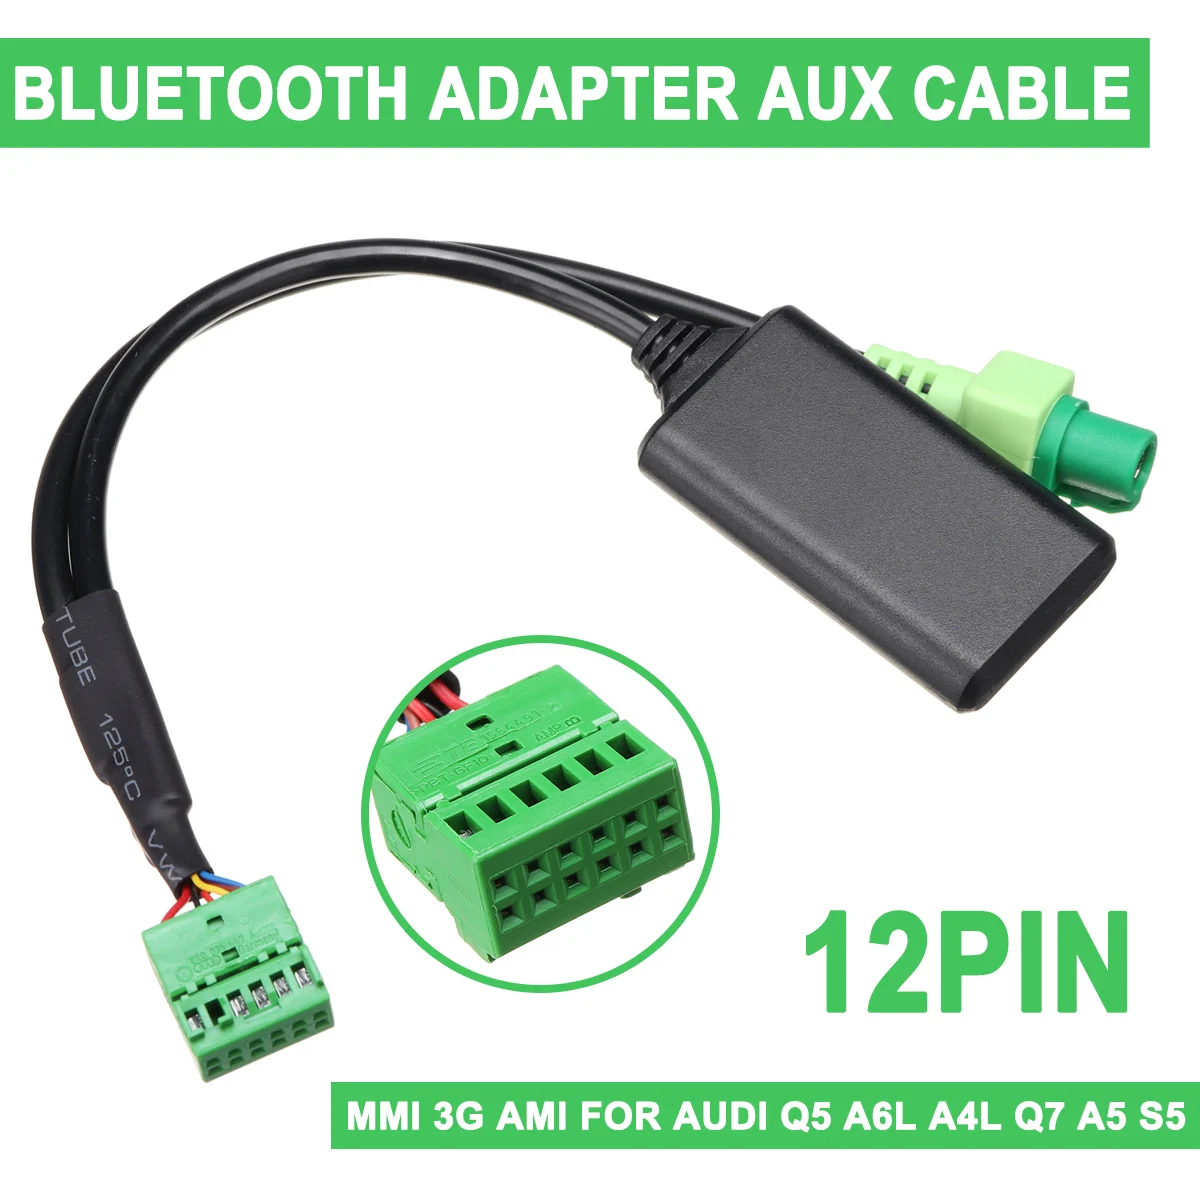 

For Audi Q5 A6L A4L Q7 A5 S5 Car MMI 3G AMI Wireless bluetooth AUX Audio Adapter Audio Input Cable MMI Socket Interface